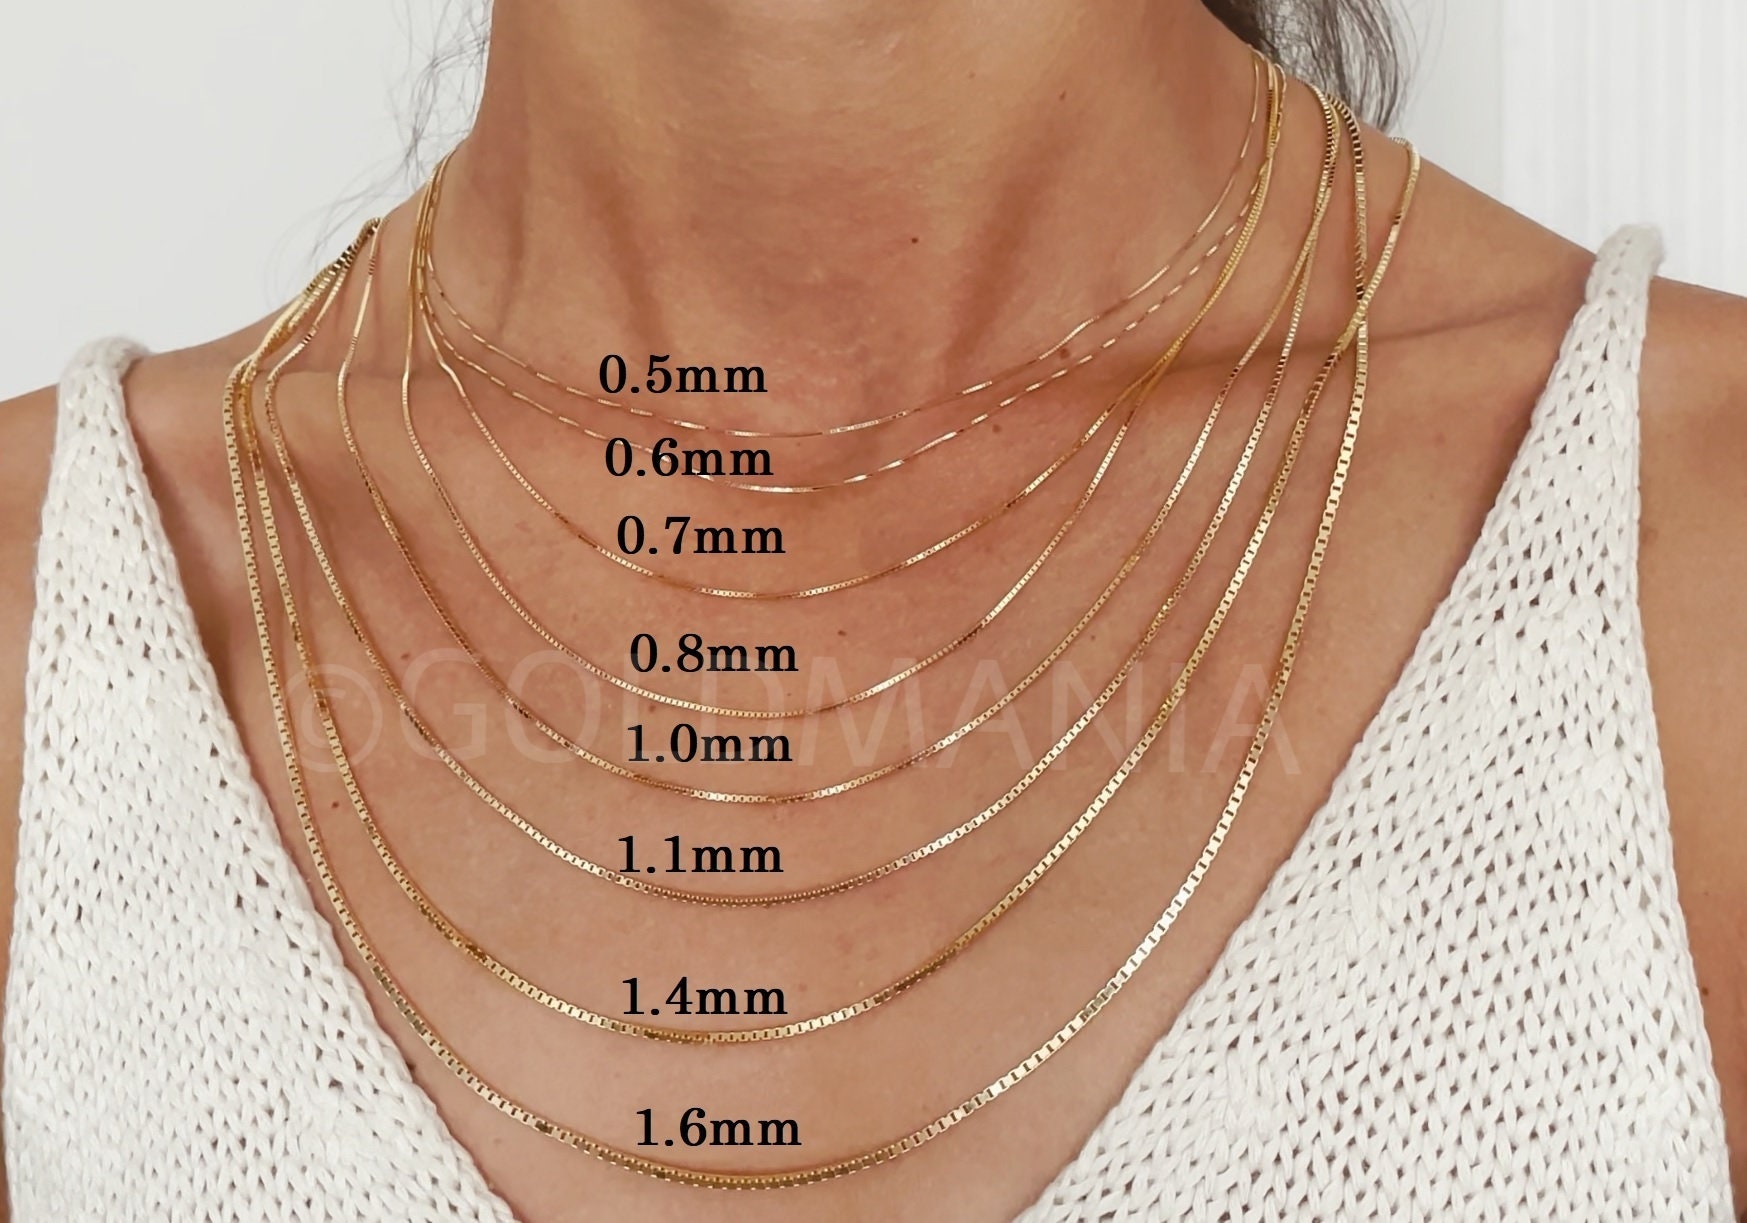 Box Chain Necklace in 18K Rose Gold, 3.4mm